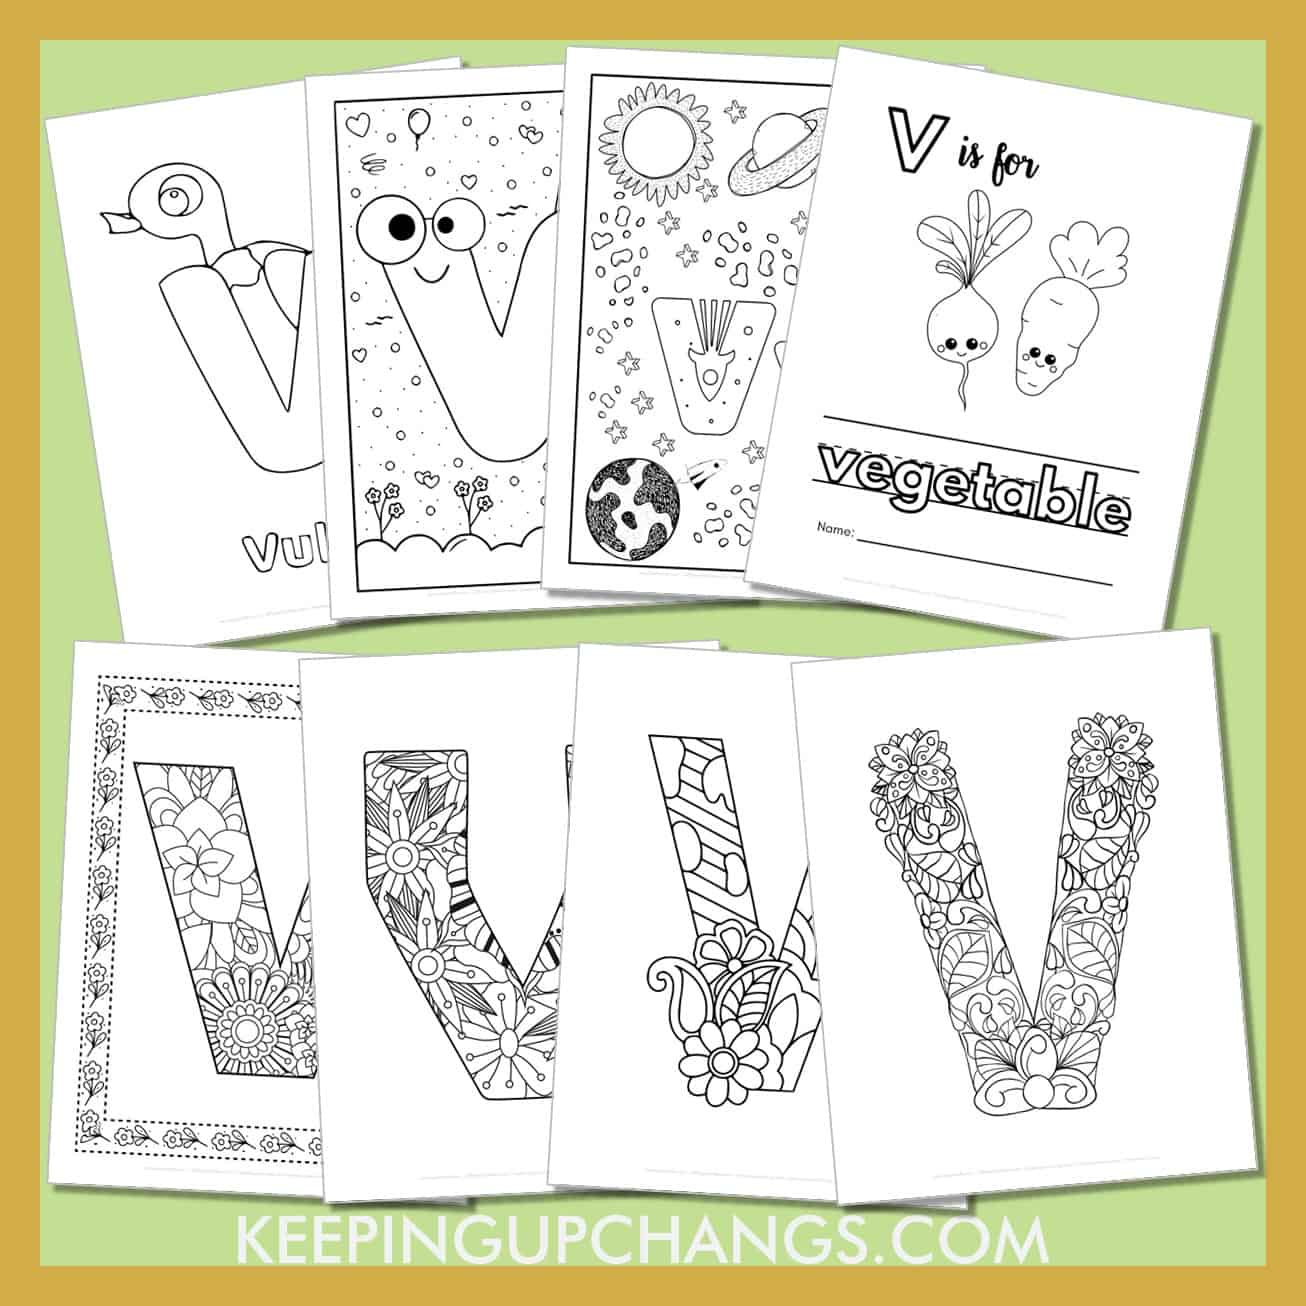 free alphabet letter v to color for toddlers, preschool, kindergarten, to adults.